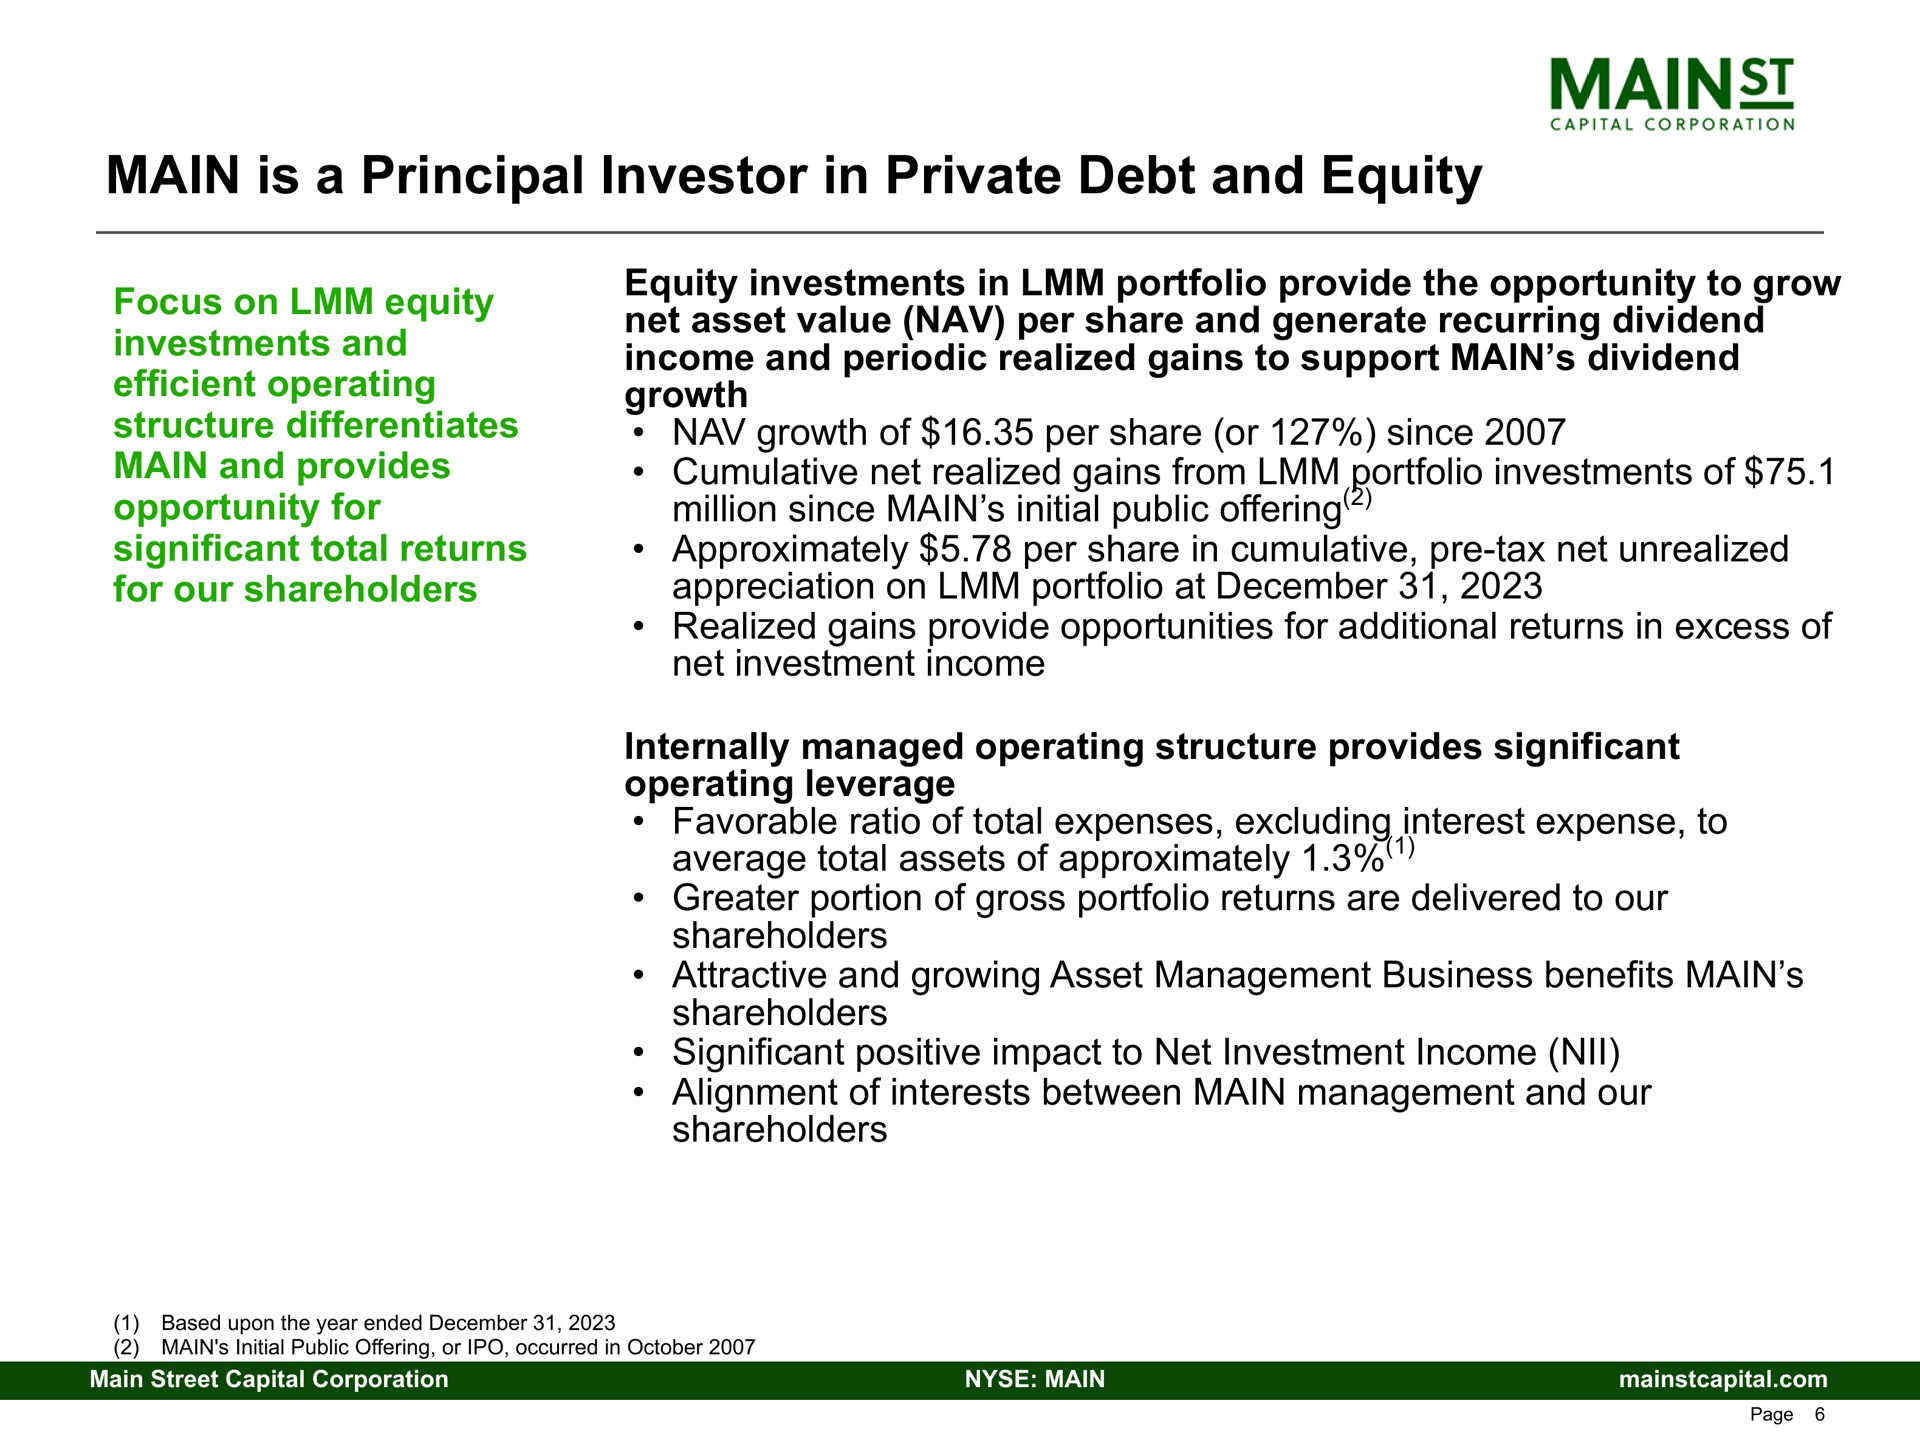 main is a principal investor in private debt and equity structure differentiates provides opportunity for growth of per share or since cumulative net realized gains from portfolio investments of million since initial public offering | Main Street Capital